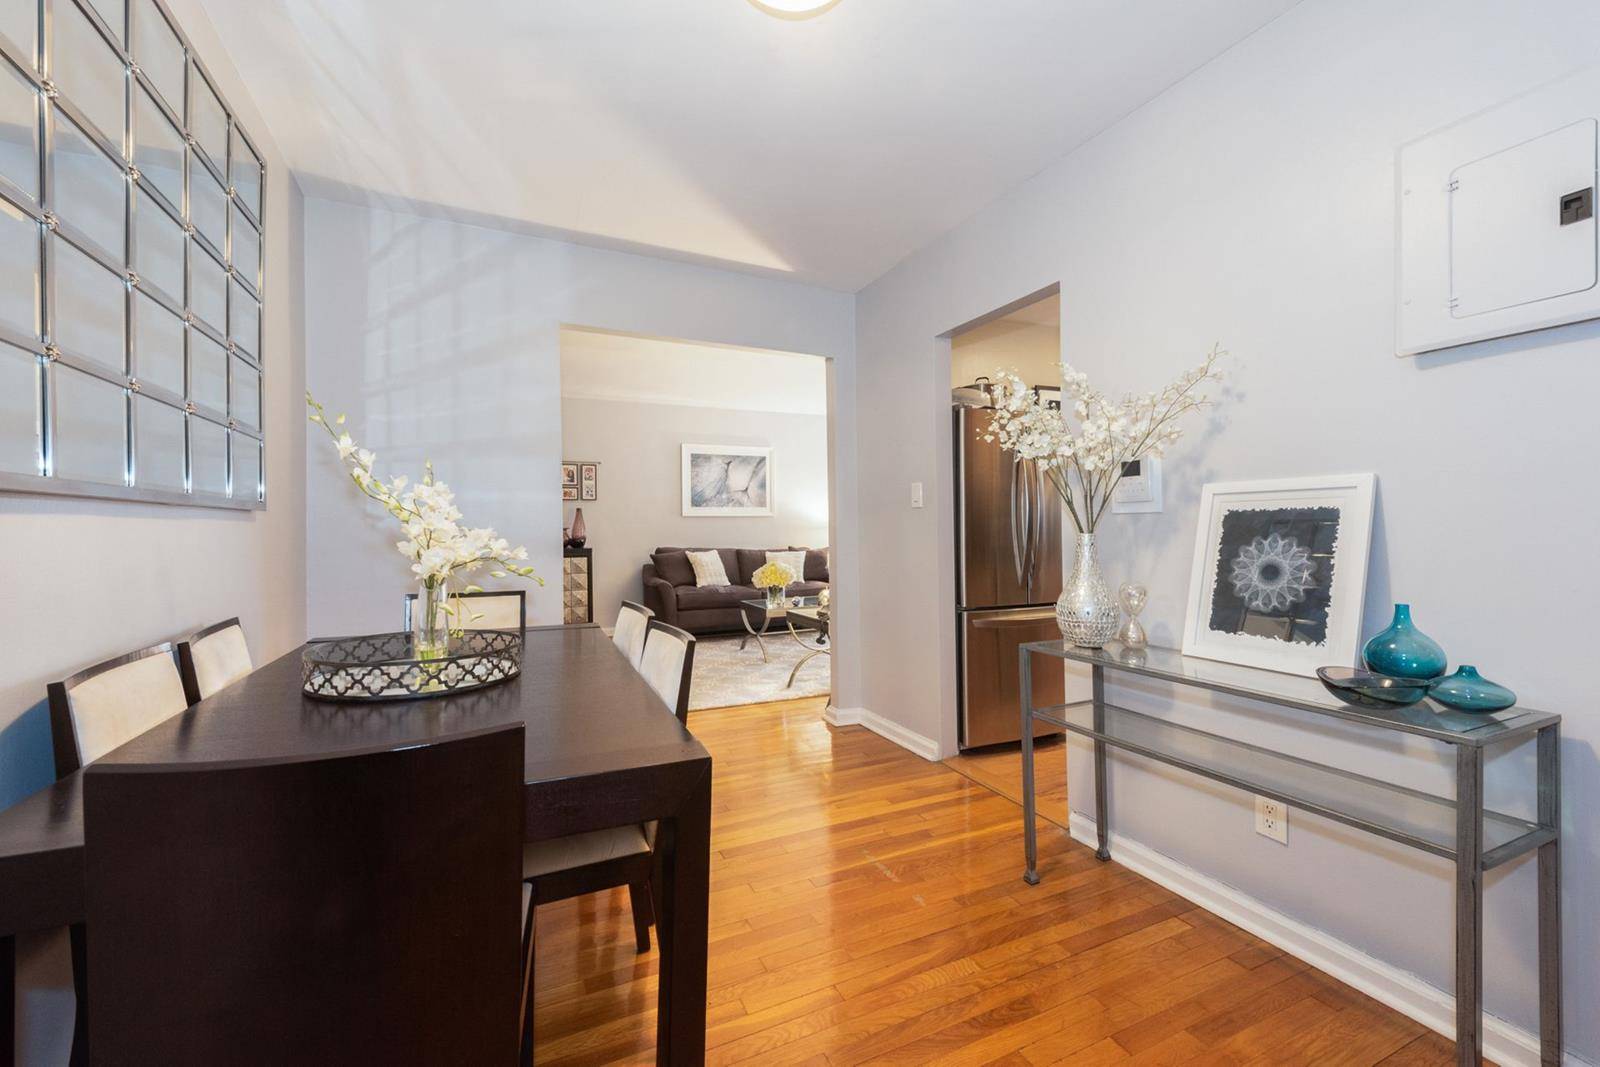 Move right in to this gem of an apartment in a jewel of a building.